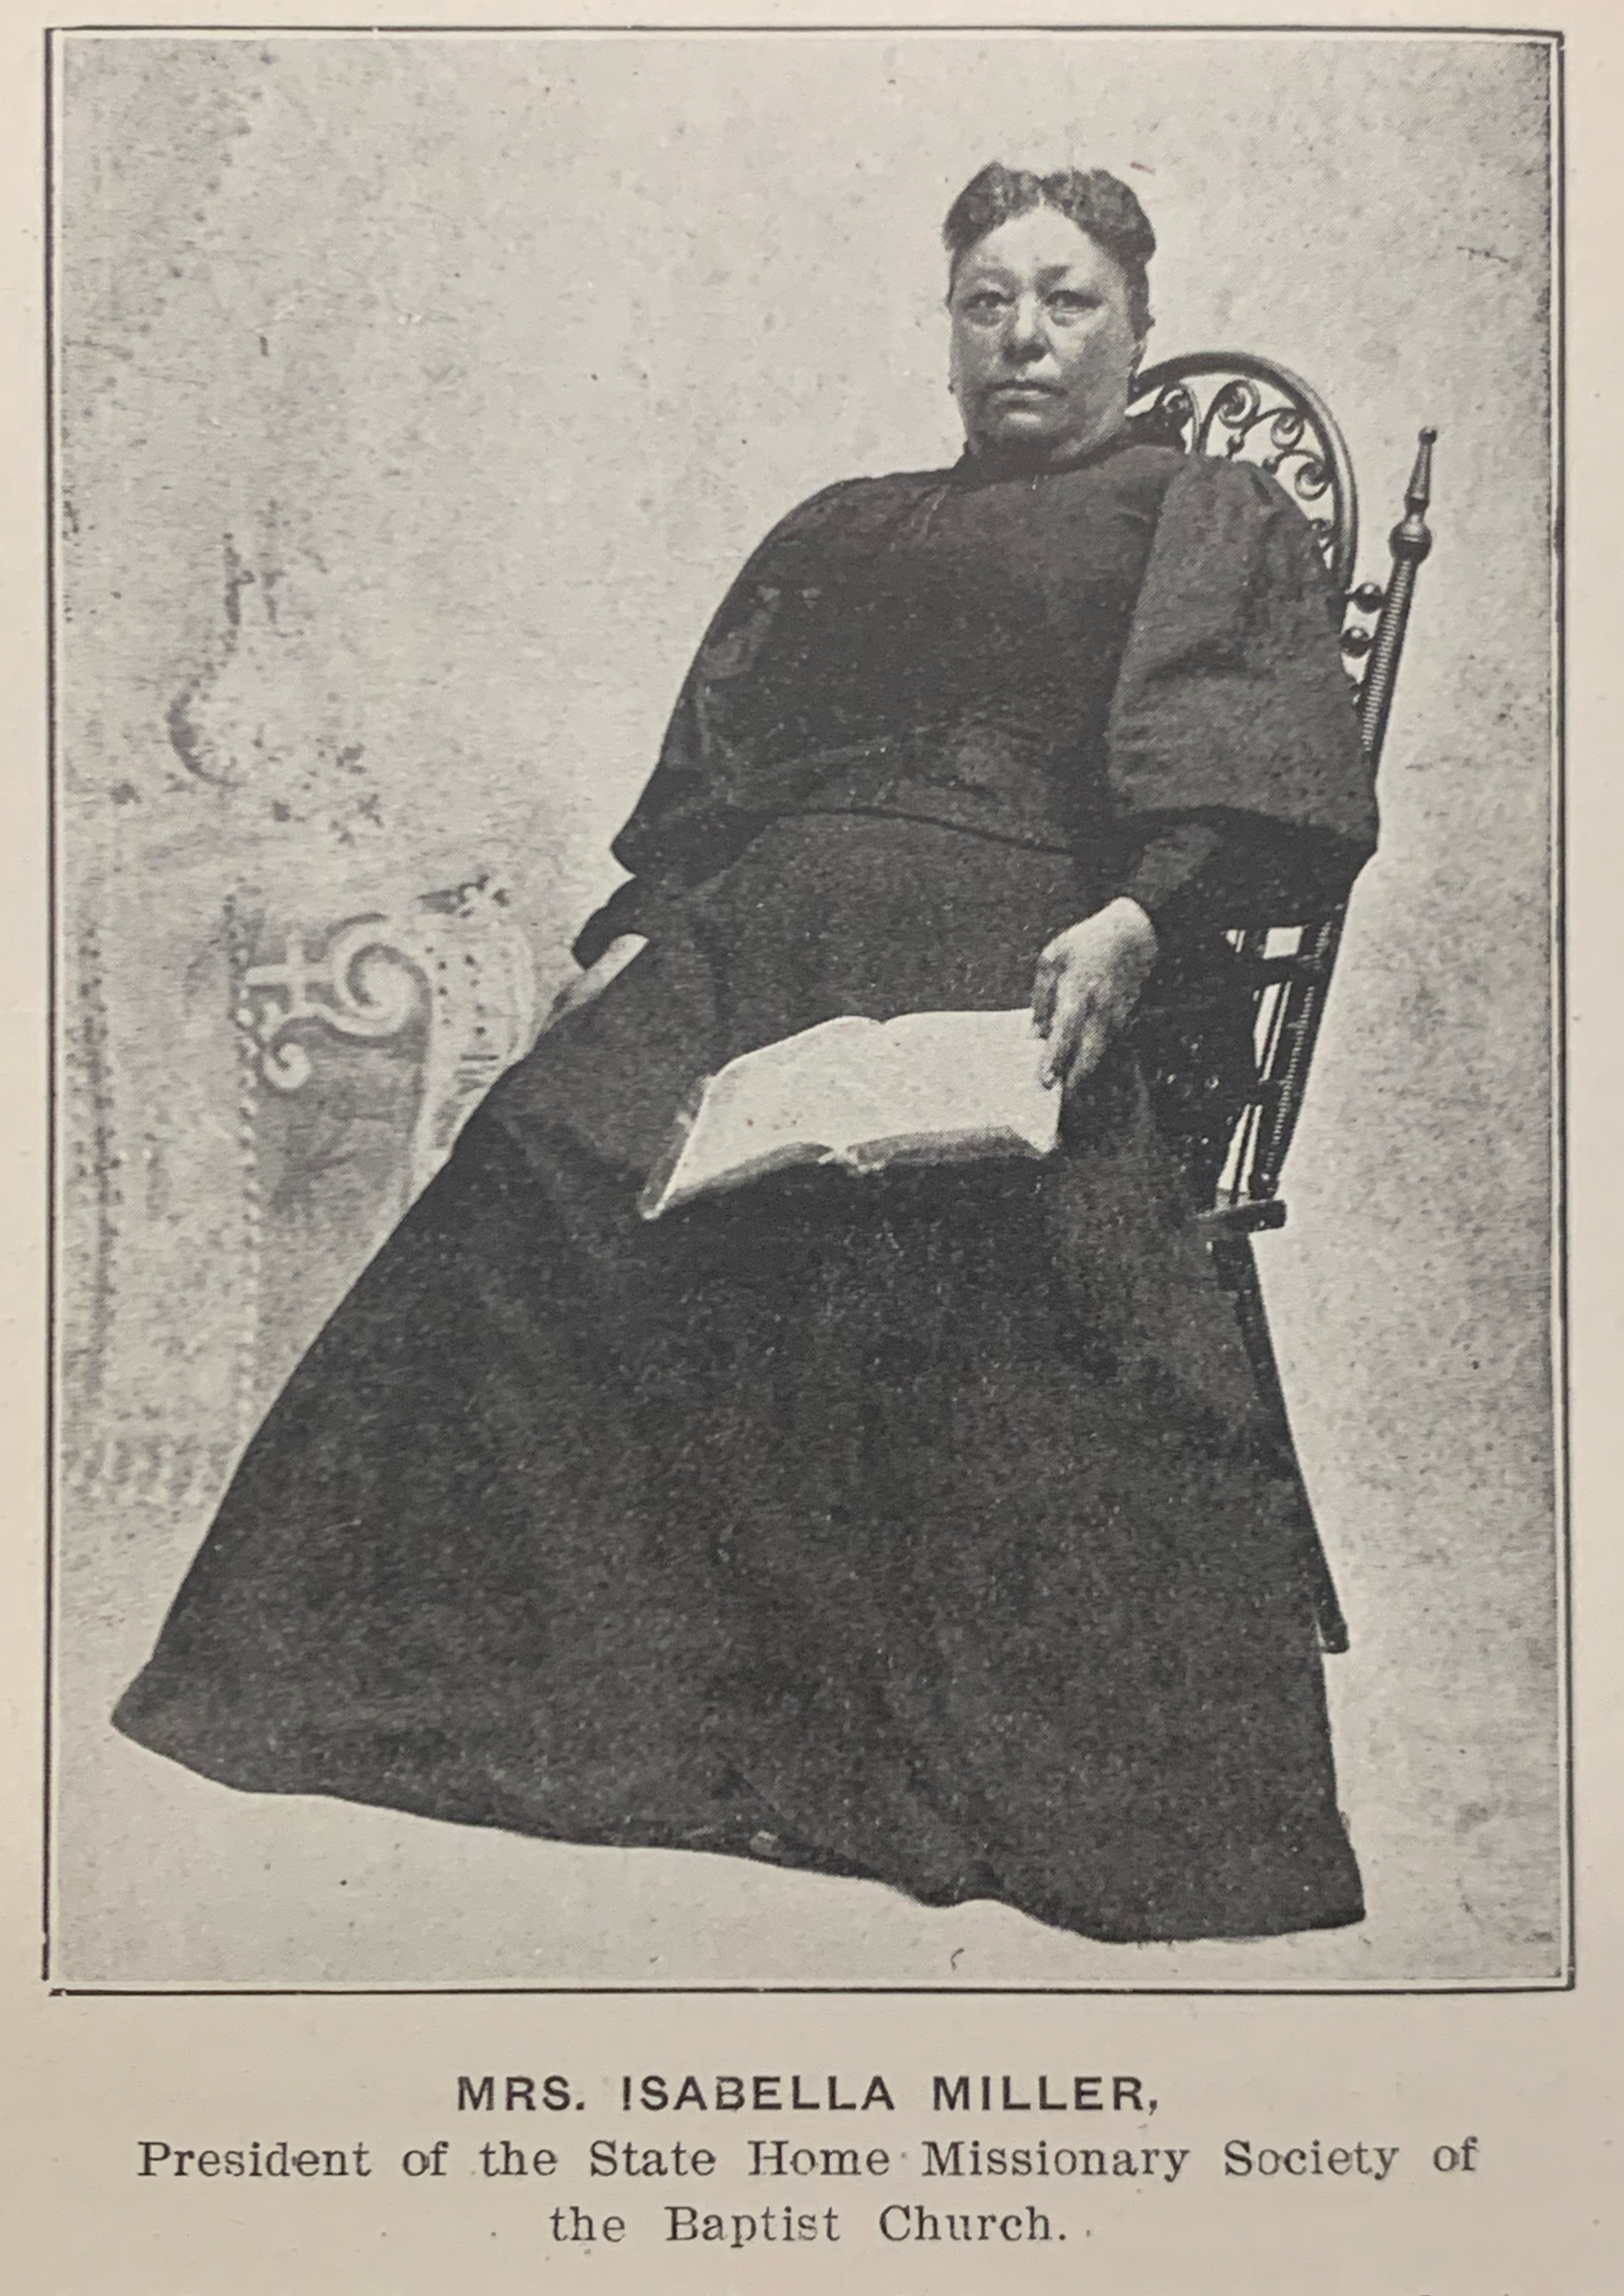 An African-American woman wearing an 1900's style dress sitting on a chair, with an open book on her lap. Text reads: Mrs. Isabella Miller, President of the State Home Missionary Society of the Baptist Church.